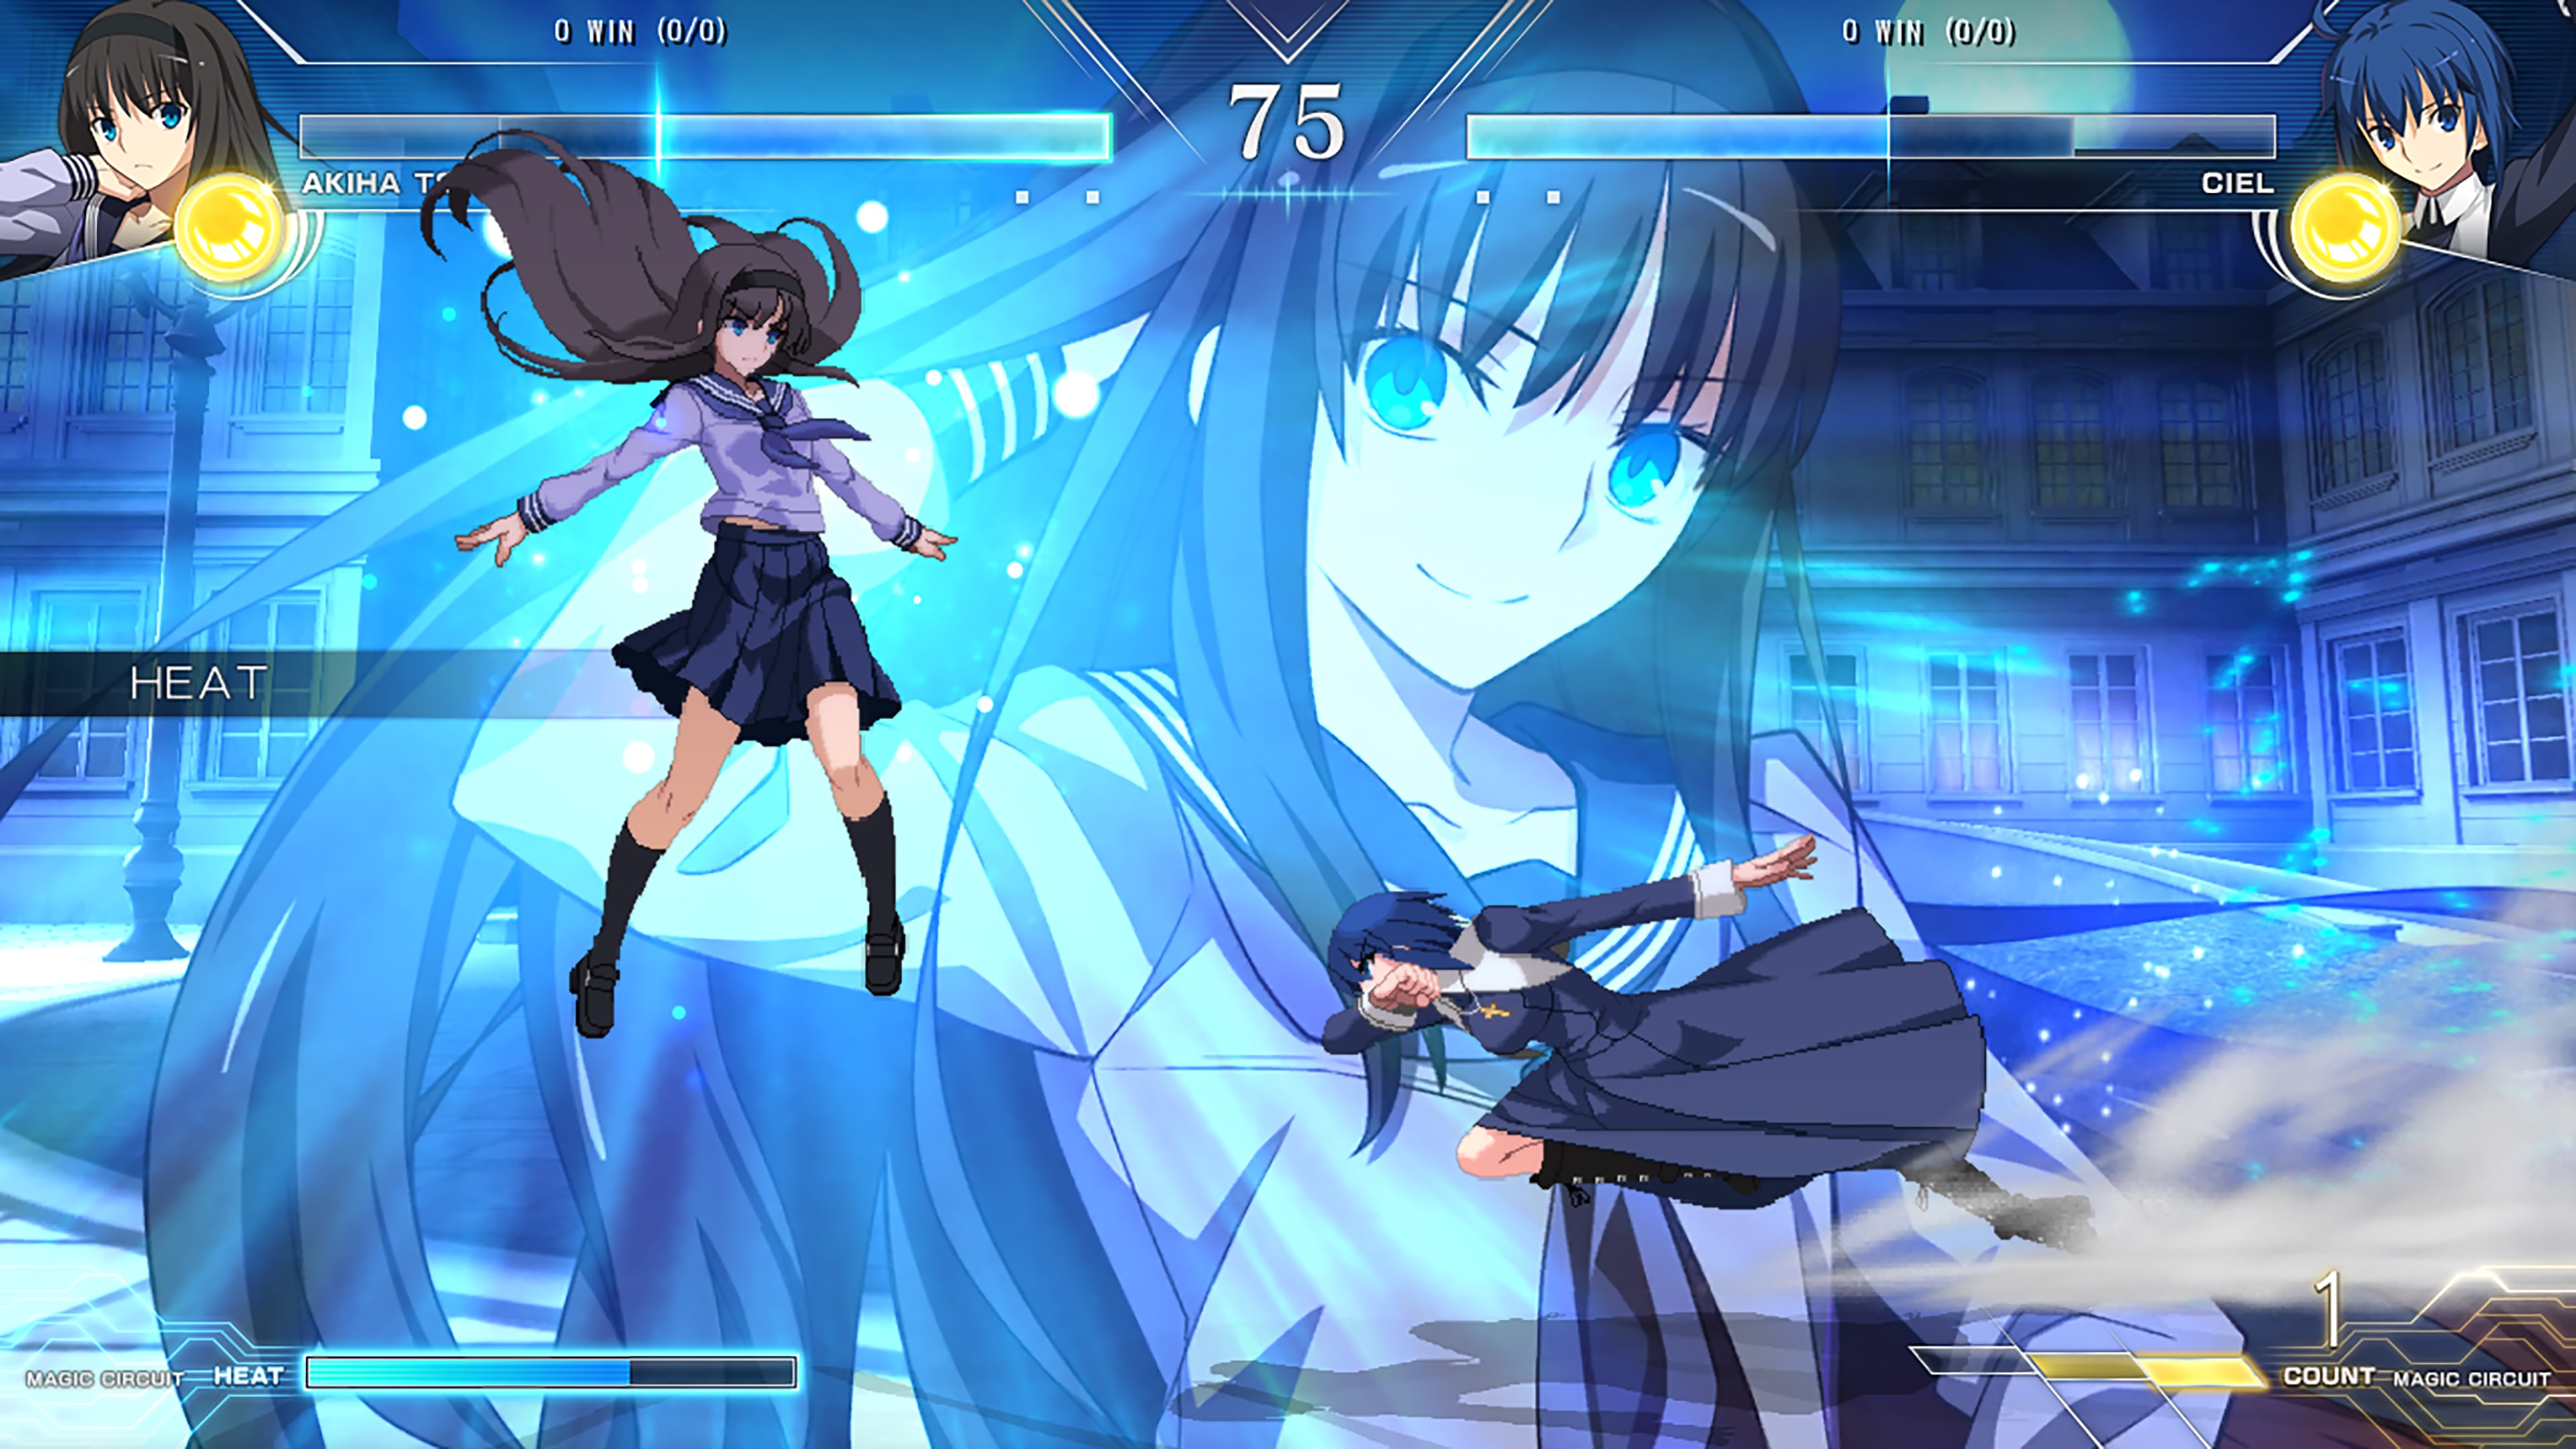 SALE爆買い MELTY BLOOD： TYPE LUMINA MELTY BLOOD ARCHIVES 初回限定